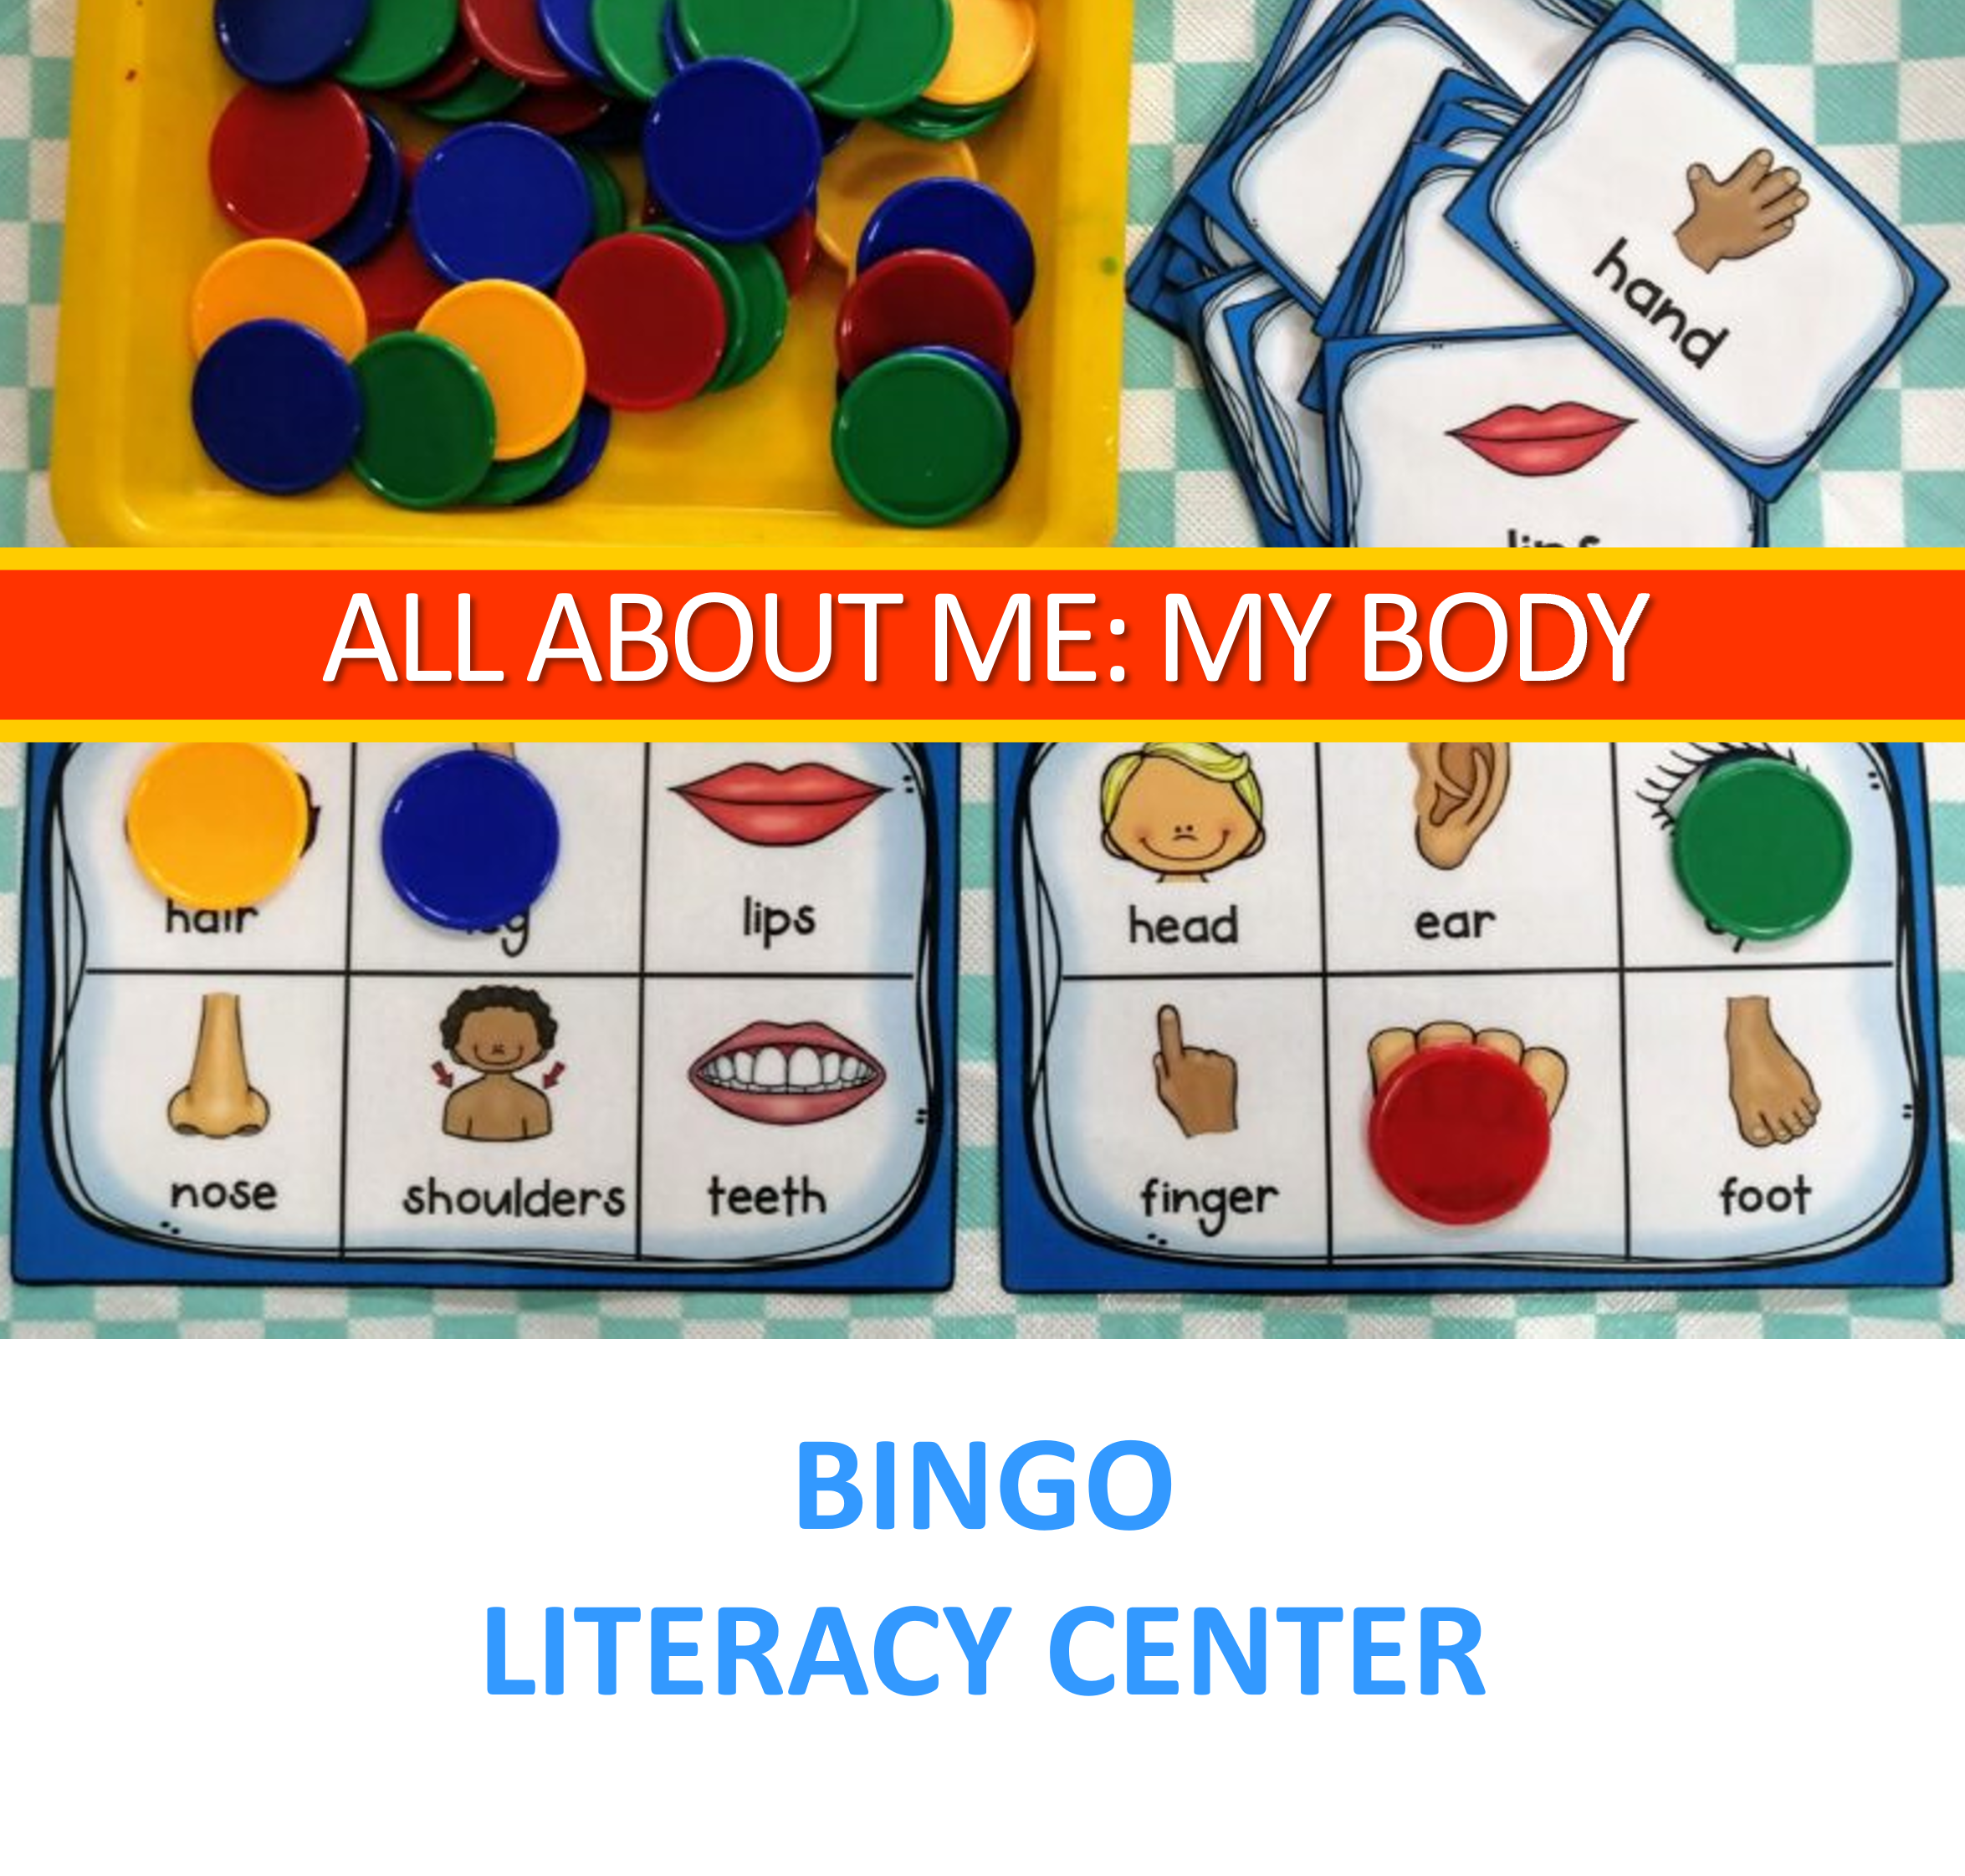 All about me themed activities